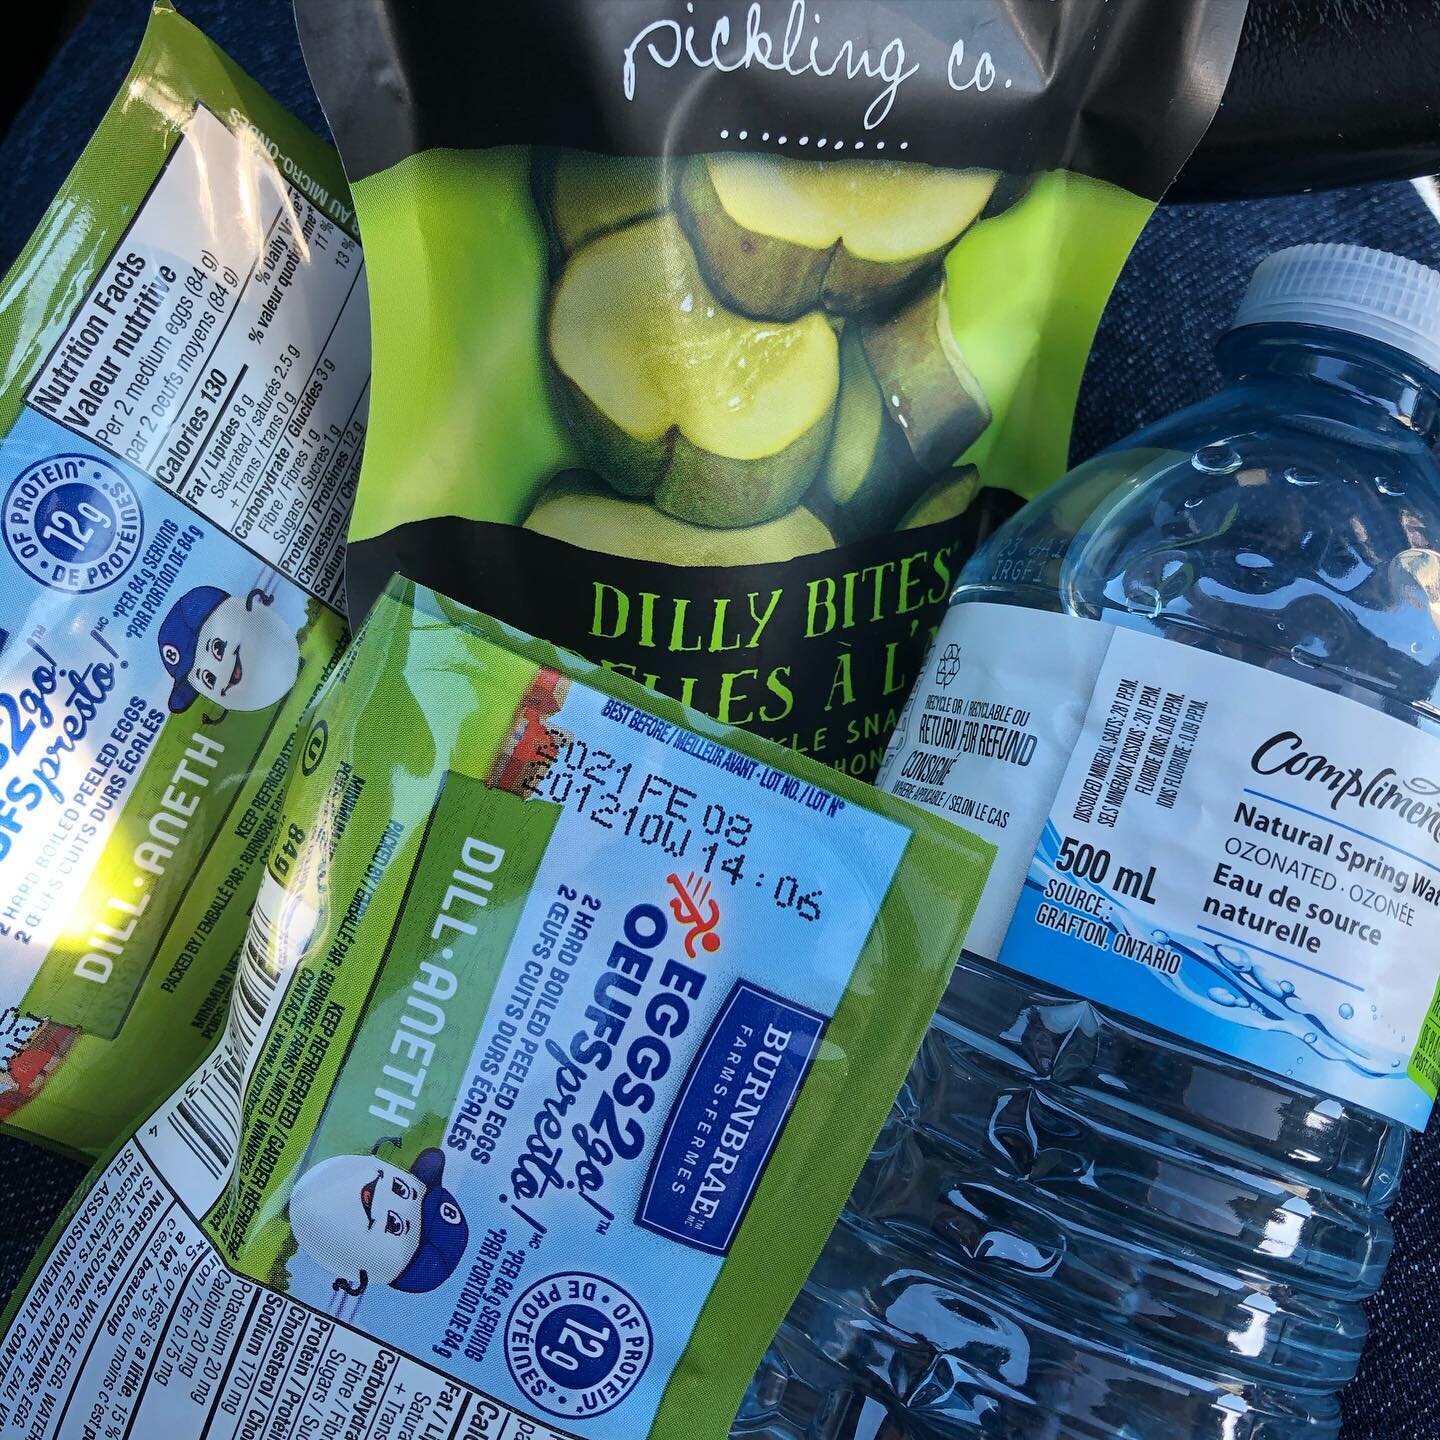 Macro-conscious snacking on the go. 

Ever lose track of time then get hungry and need to replenish while on the road but you don&rsquo;t have any supplies with you? Those that are contest prepping or have better planning skills would say no, but I s